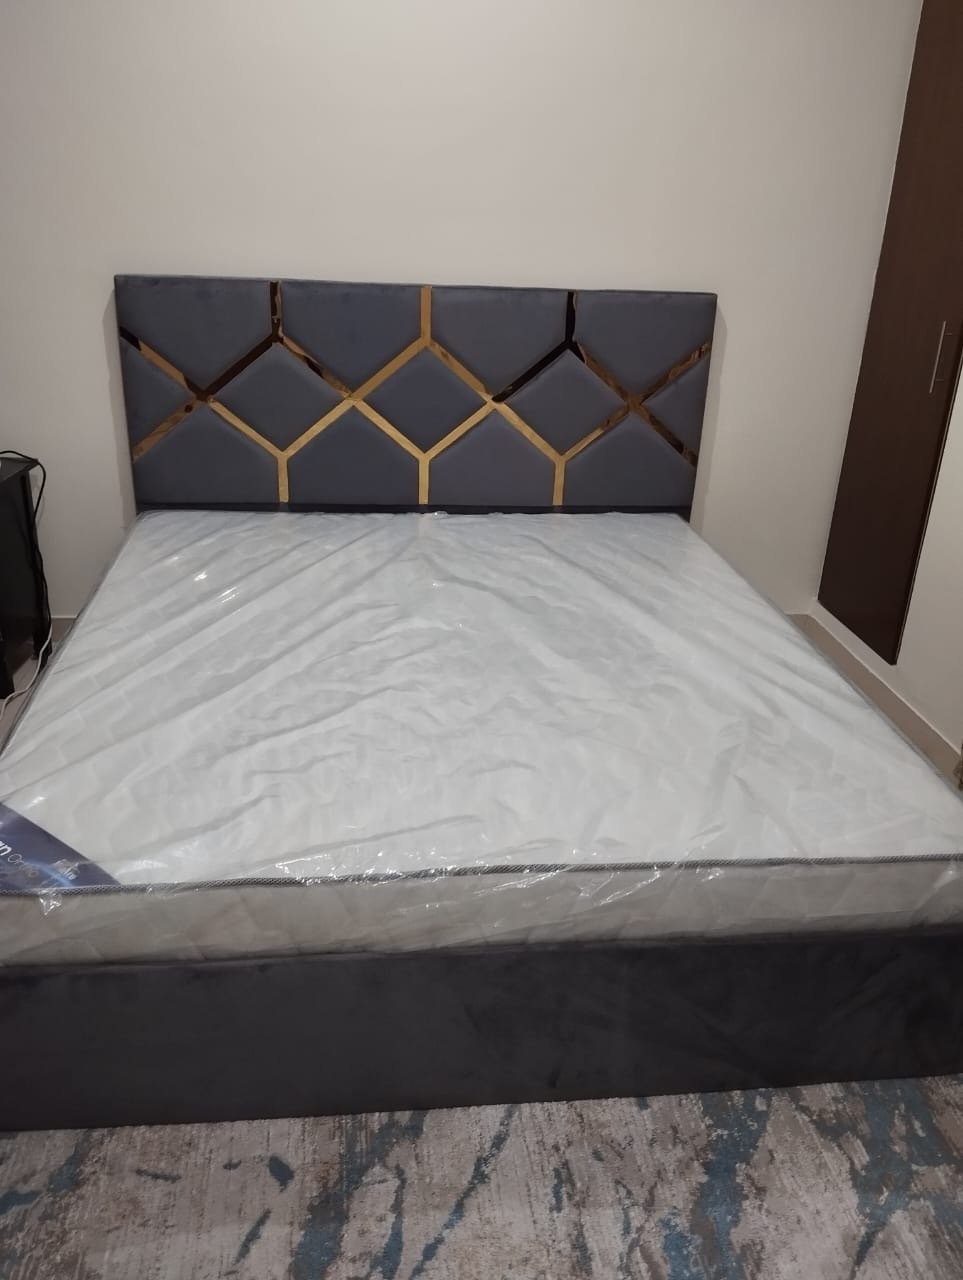 Bed For Sale In Dubai With Mattress